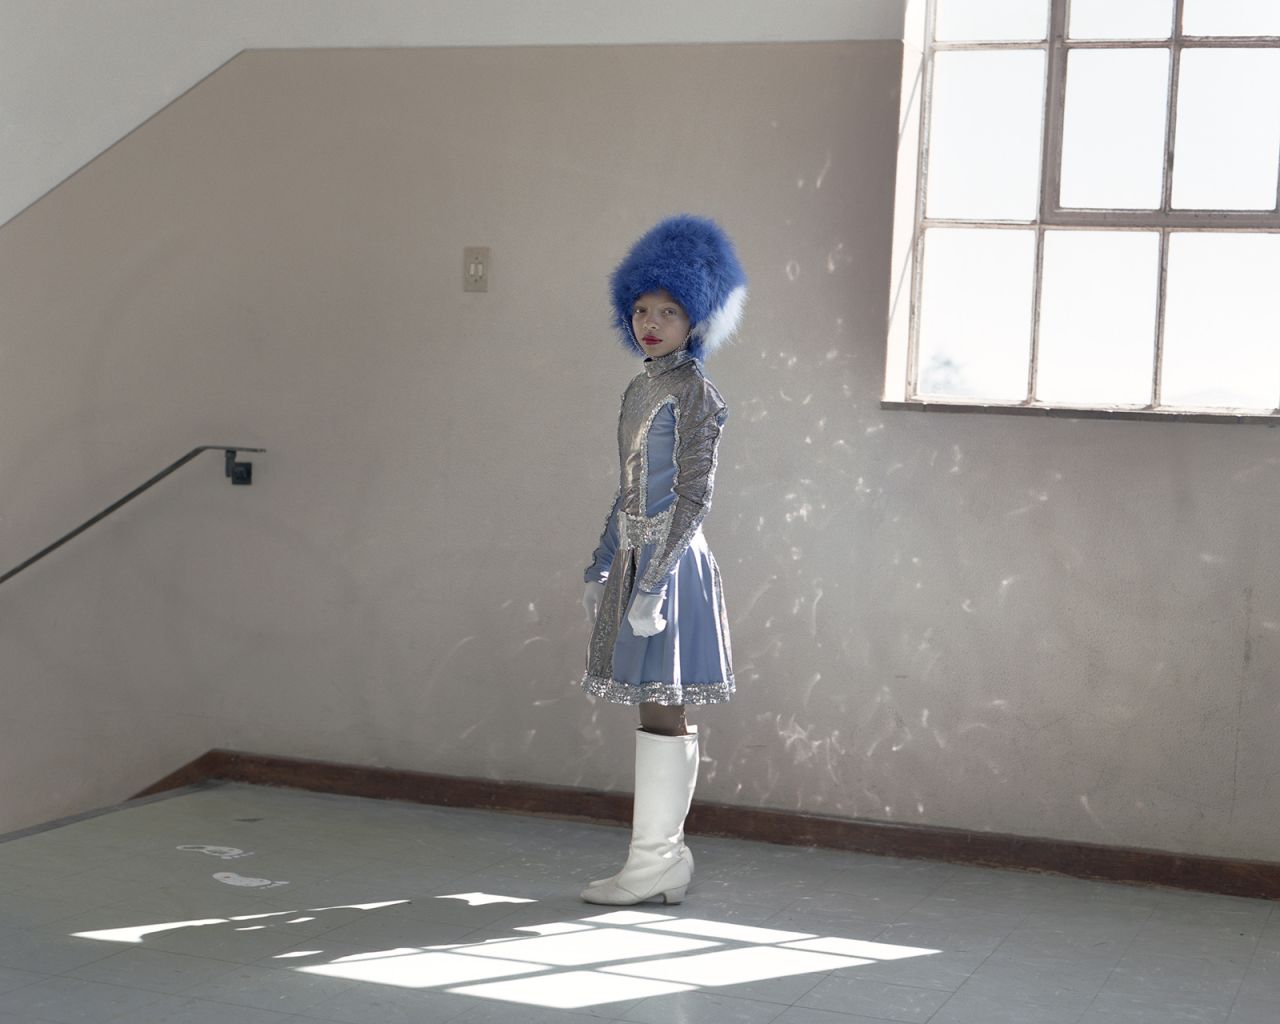 Mann sees the image-making process as a collaboration between subject and artist. She prefers not to direct and instead invites her subjects to choreograph their own portraits. Tanique Williams is a majorette in the Hottentots Holland team, Cape Town, 2018.